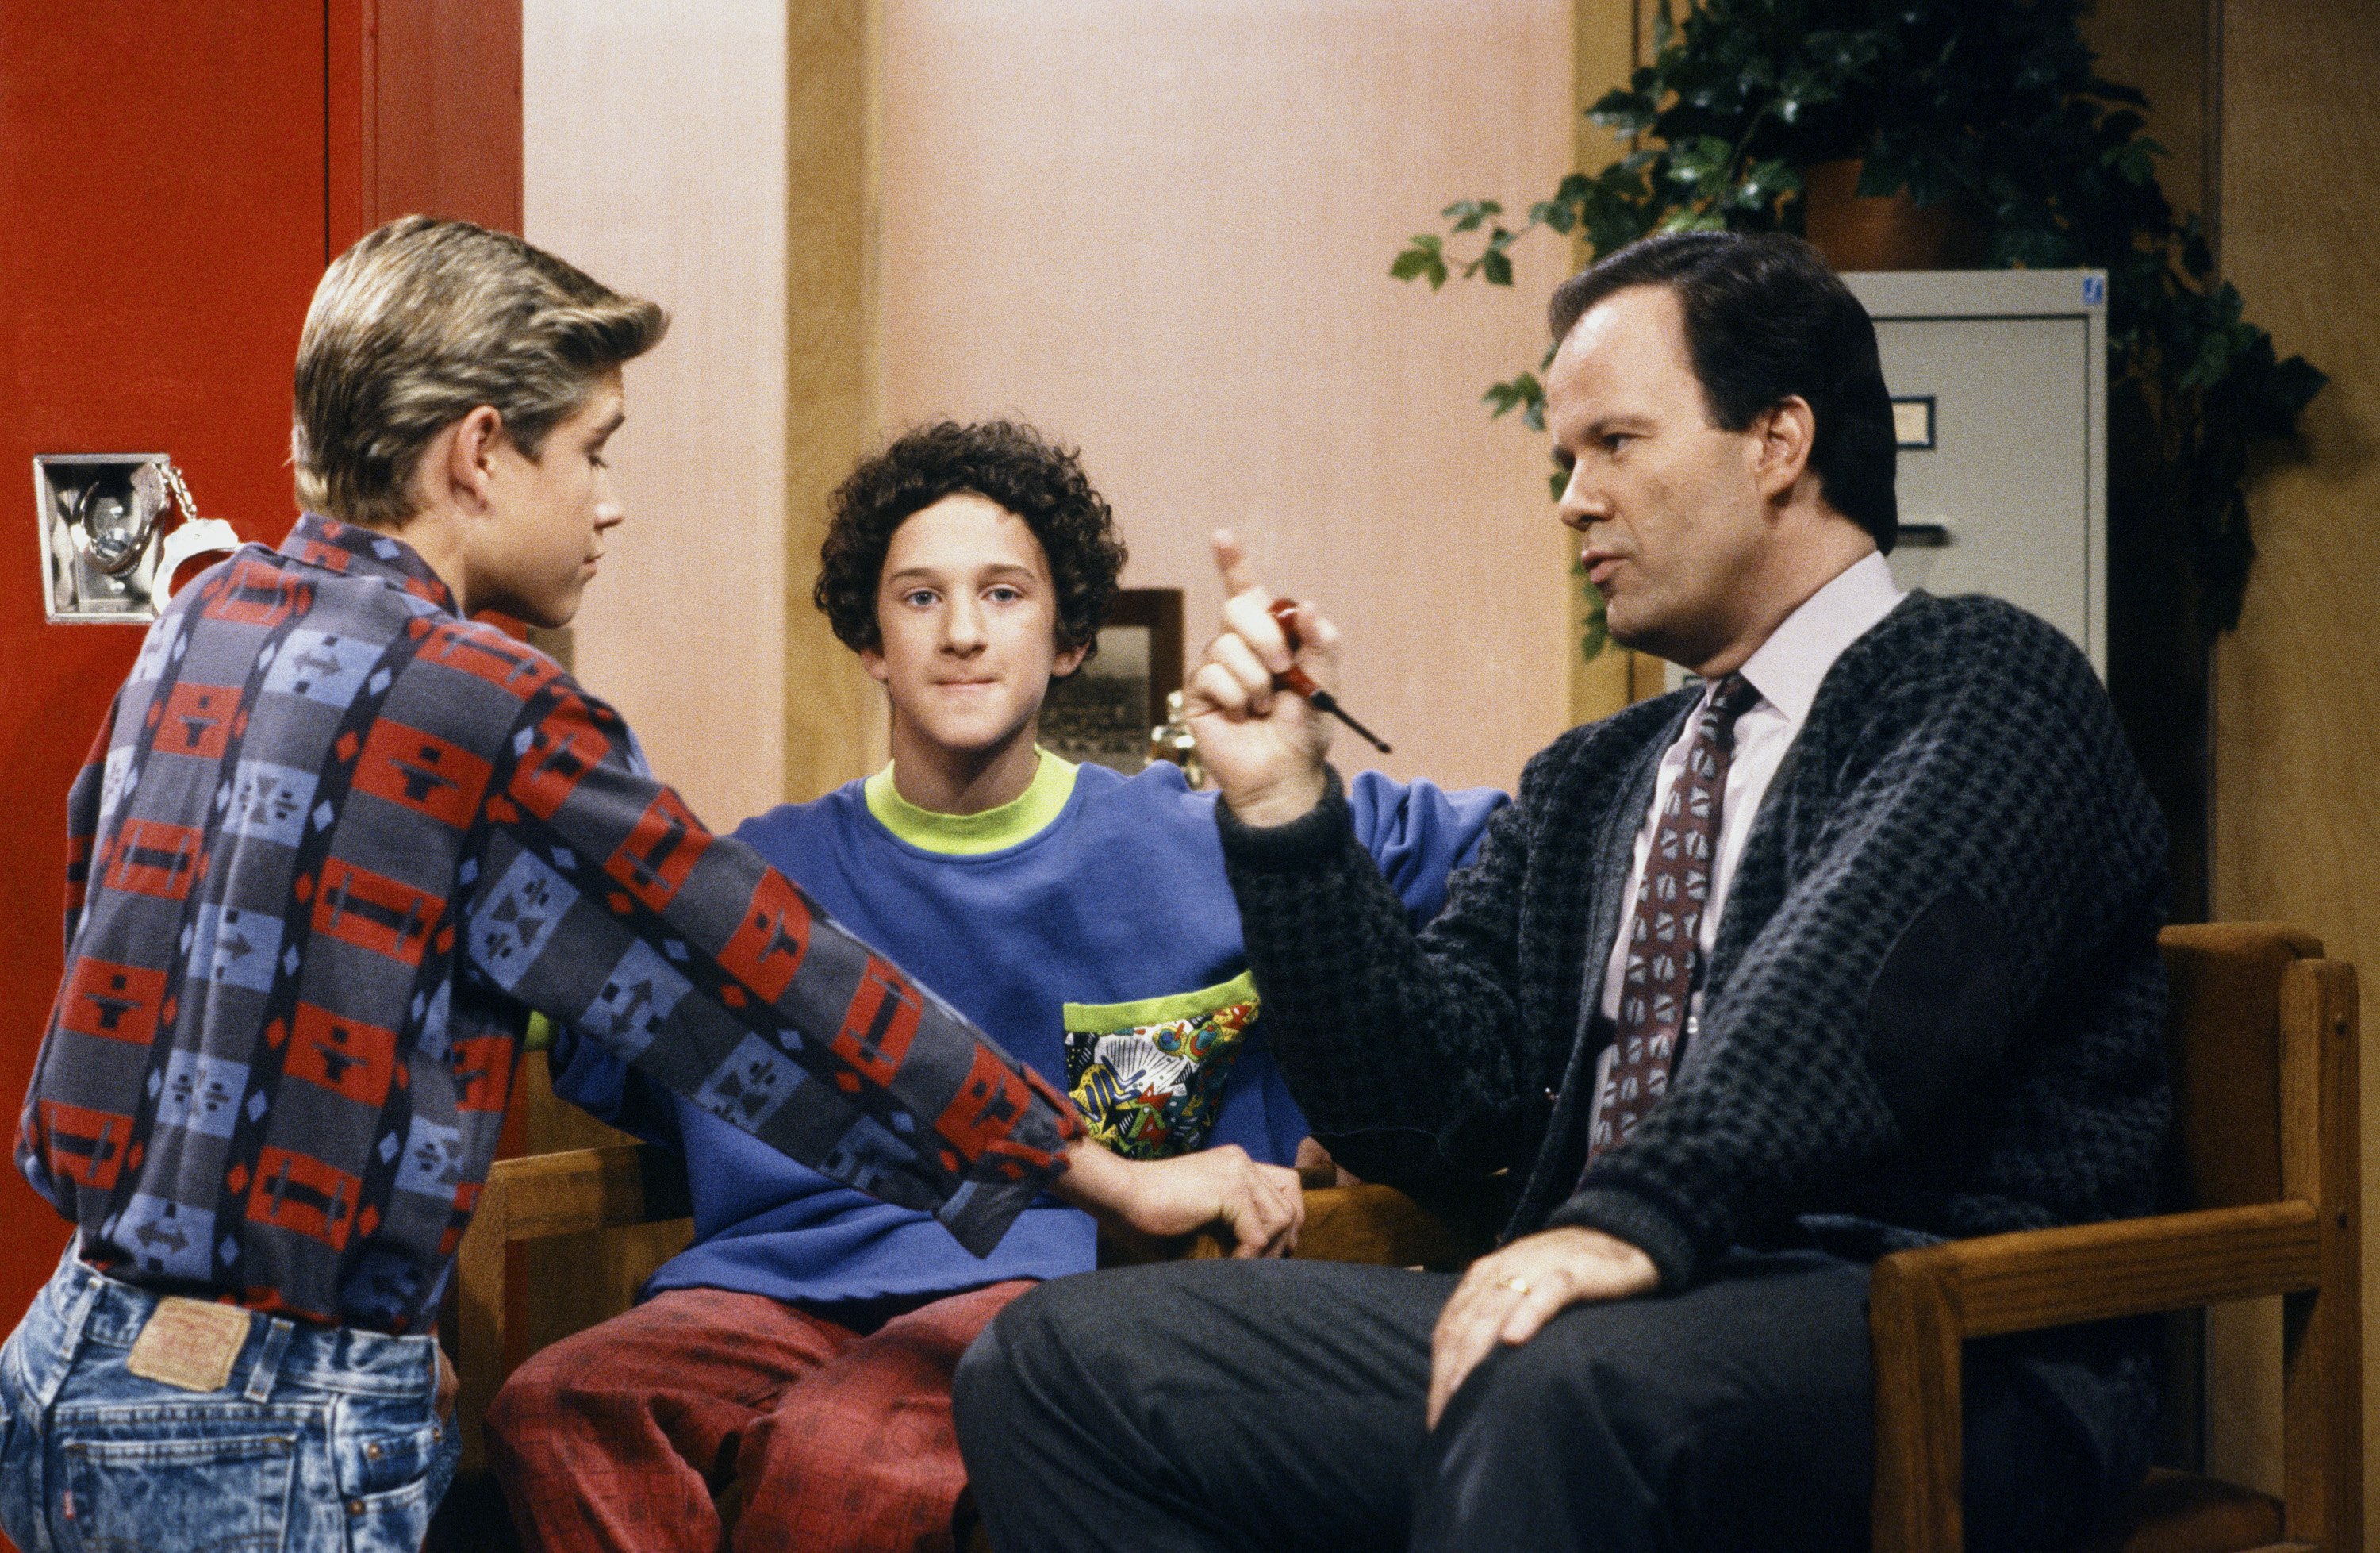 Pictured: (L-R) Mark-Paul Gosselaar as Zachary 'Zack' Morris, Dustin Diamond as Screech Powers, Dennis Haskins as Mr. Richard Belding on "Saved By The Bell" on March 31, 1989. | Source: Getty Images